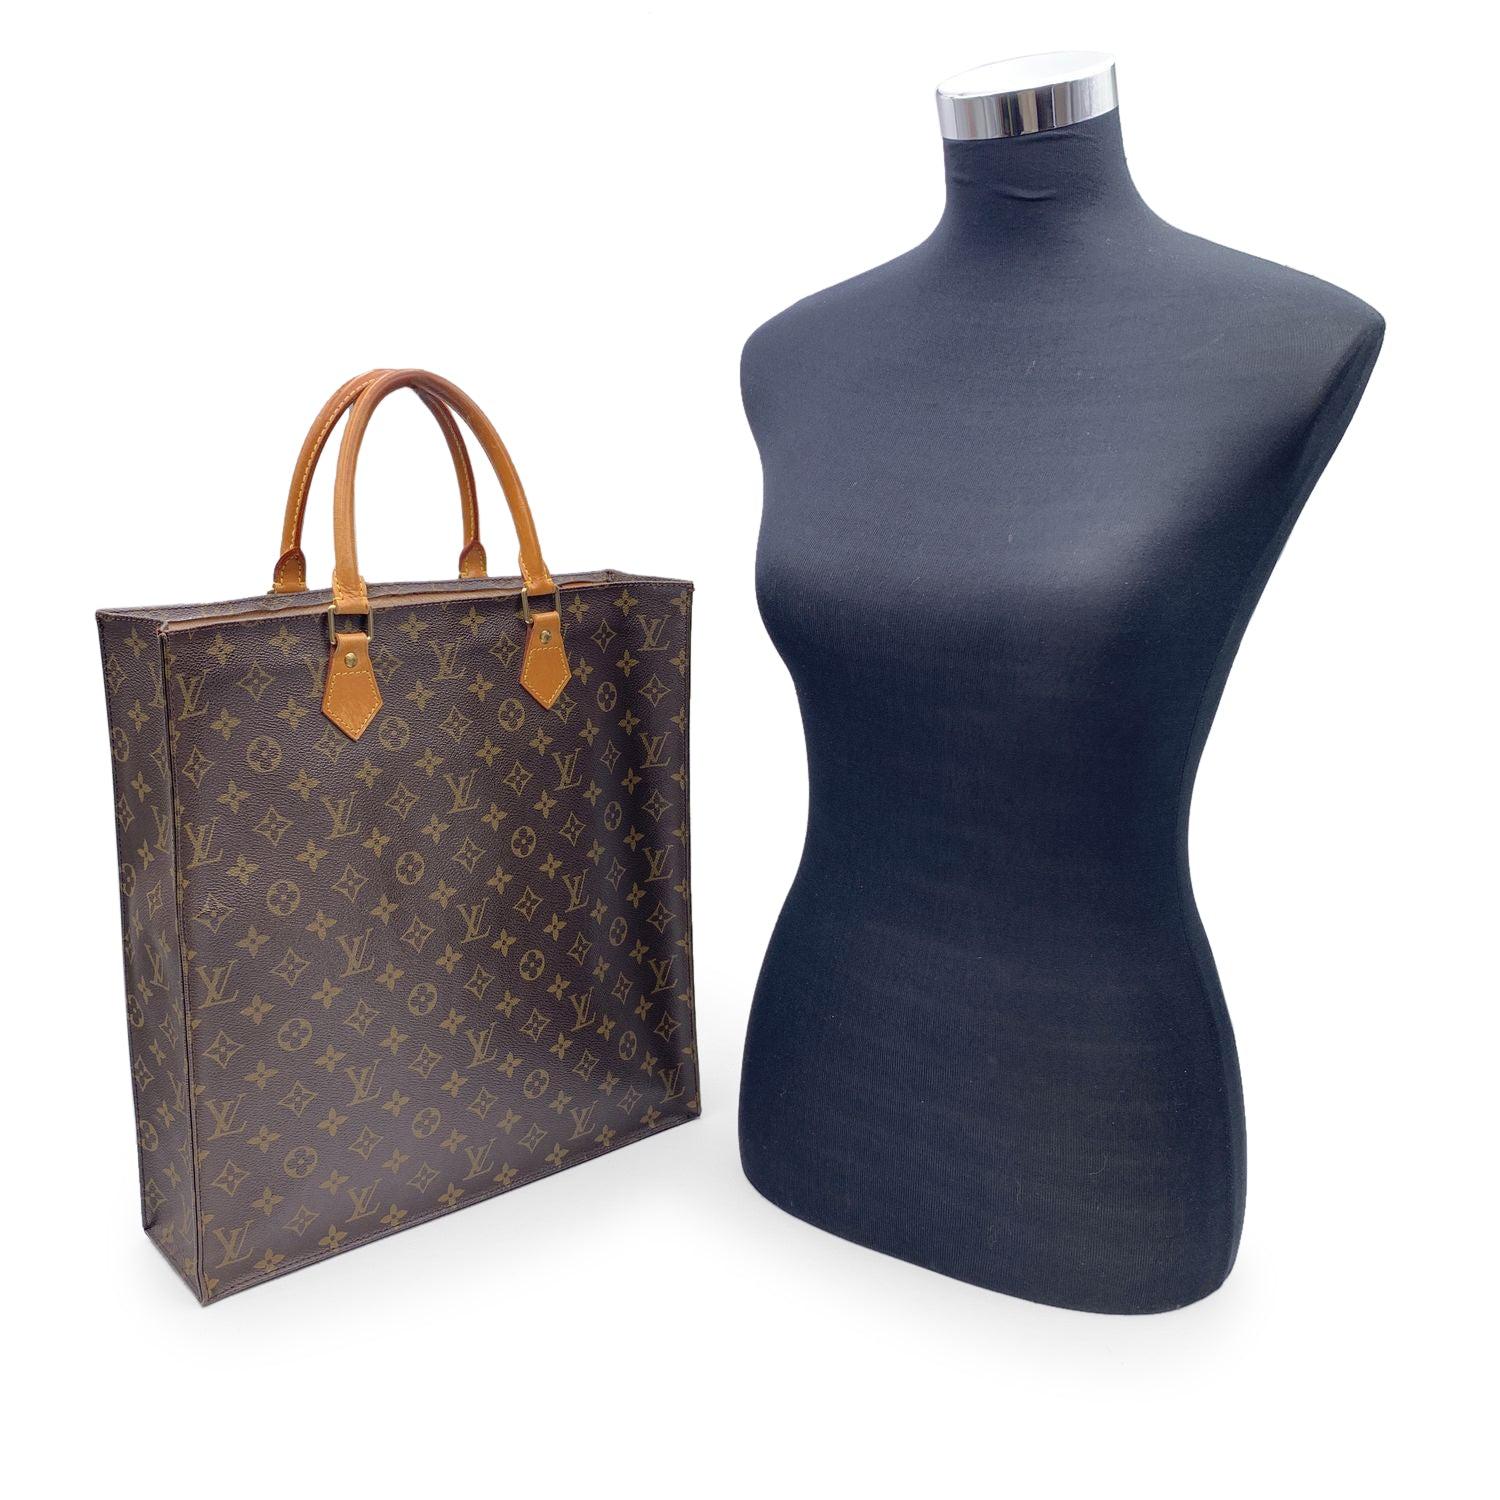 Vintage LOUIS VUITTON 'Sac Plat' tote bag in timeless monogram canvas. Rectangular box shape and open top. Double rounded leather top handles. Canvas lining. 'LOUIS VUITTON - Made in France' tag inside. Data code inside the interior pocket Condition